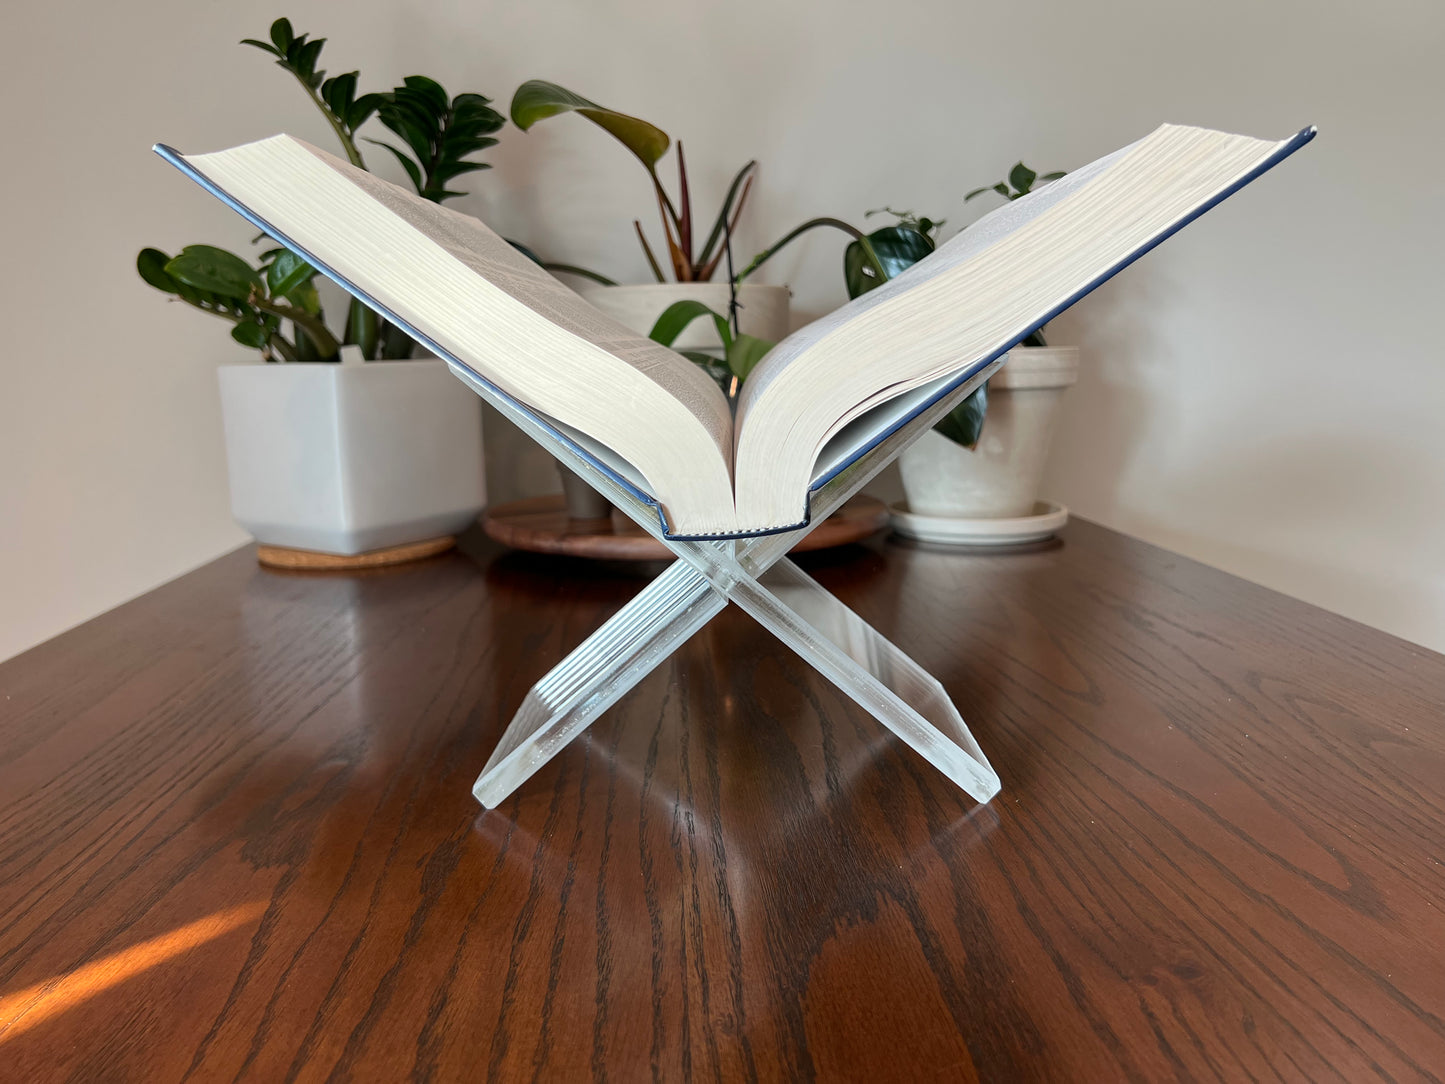 Acrylic Open Book Display Stand